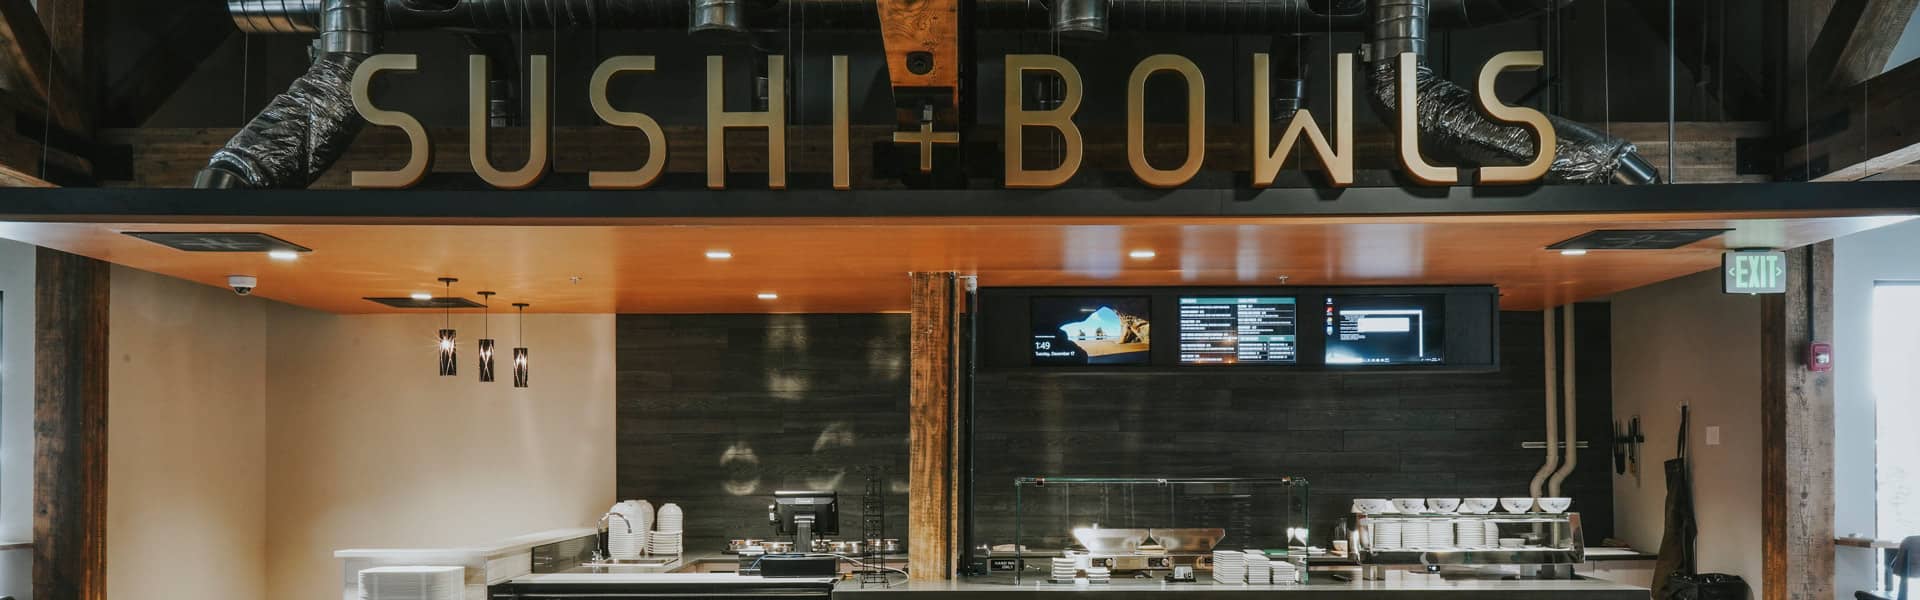 Sushi + Bowls sign over the kitchen